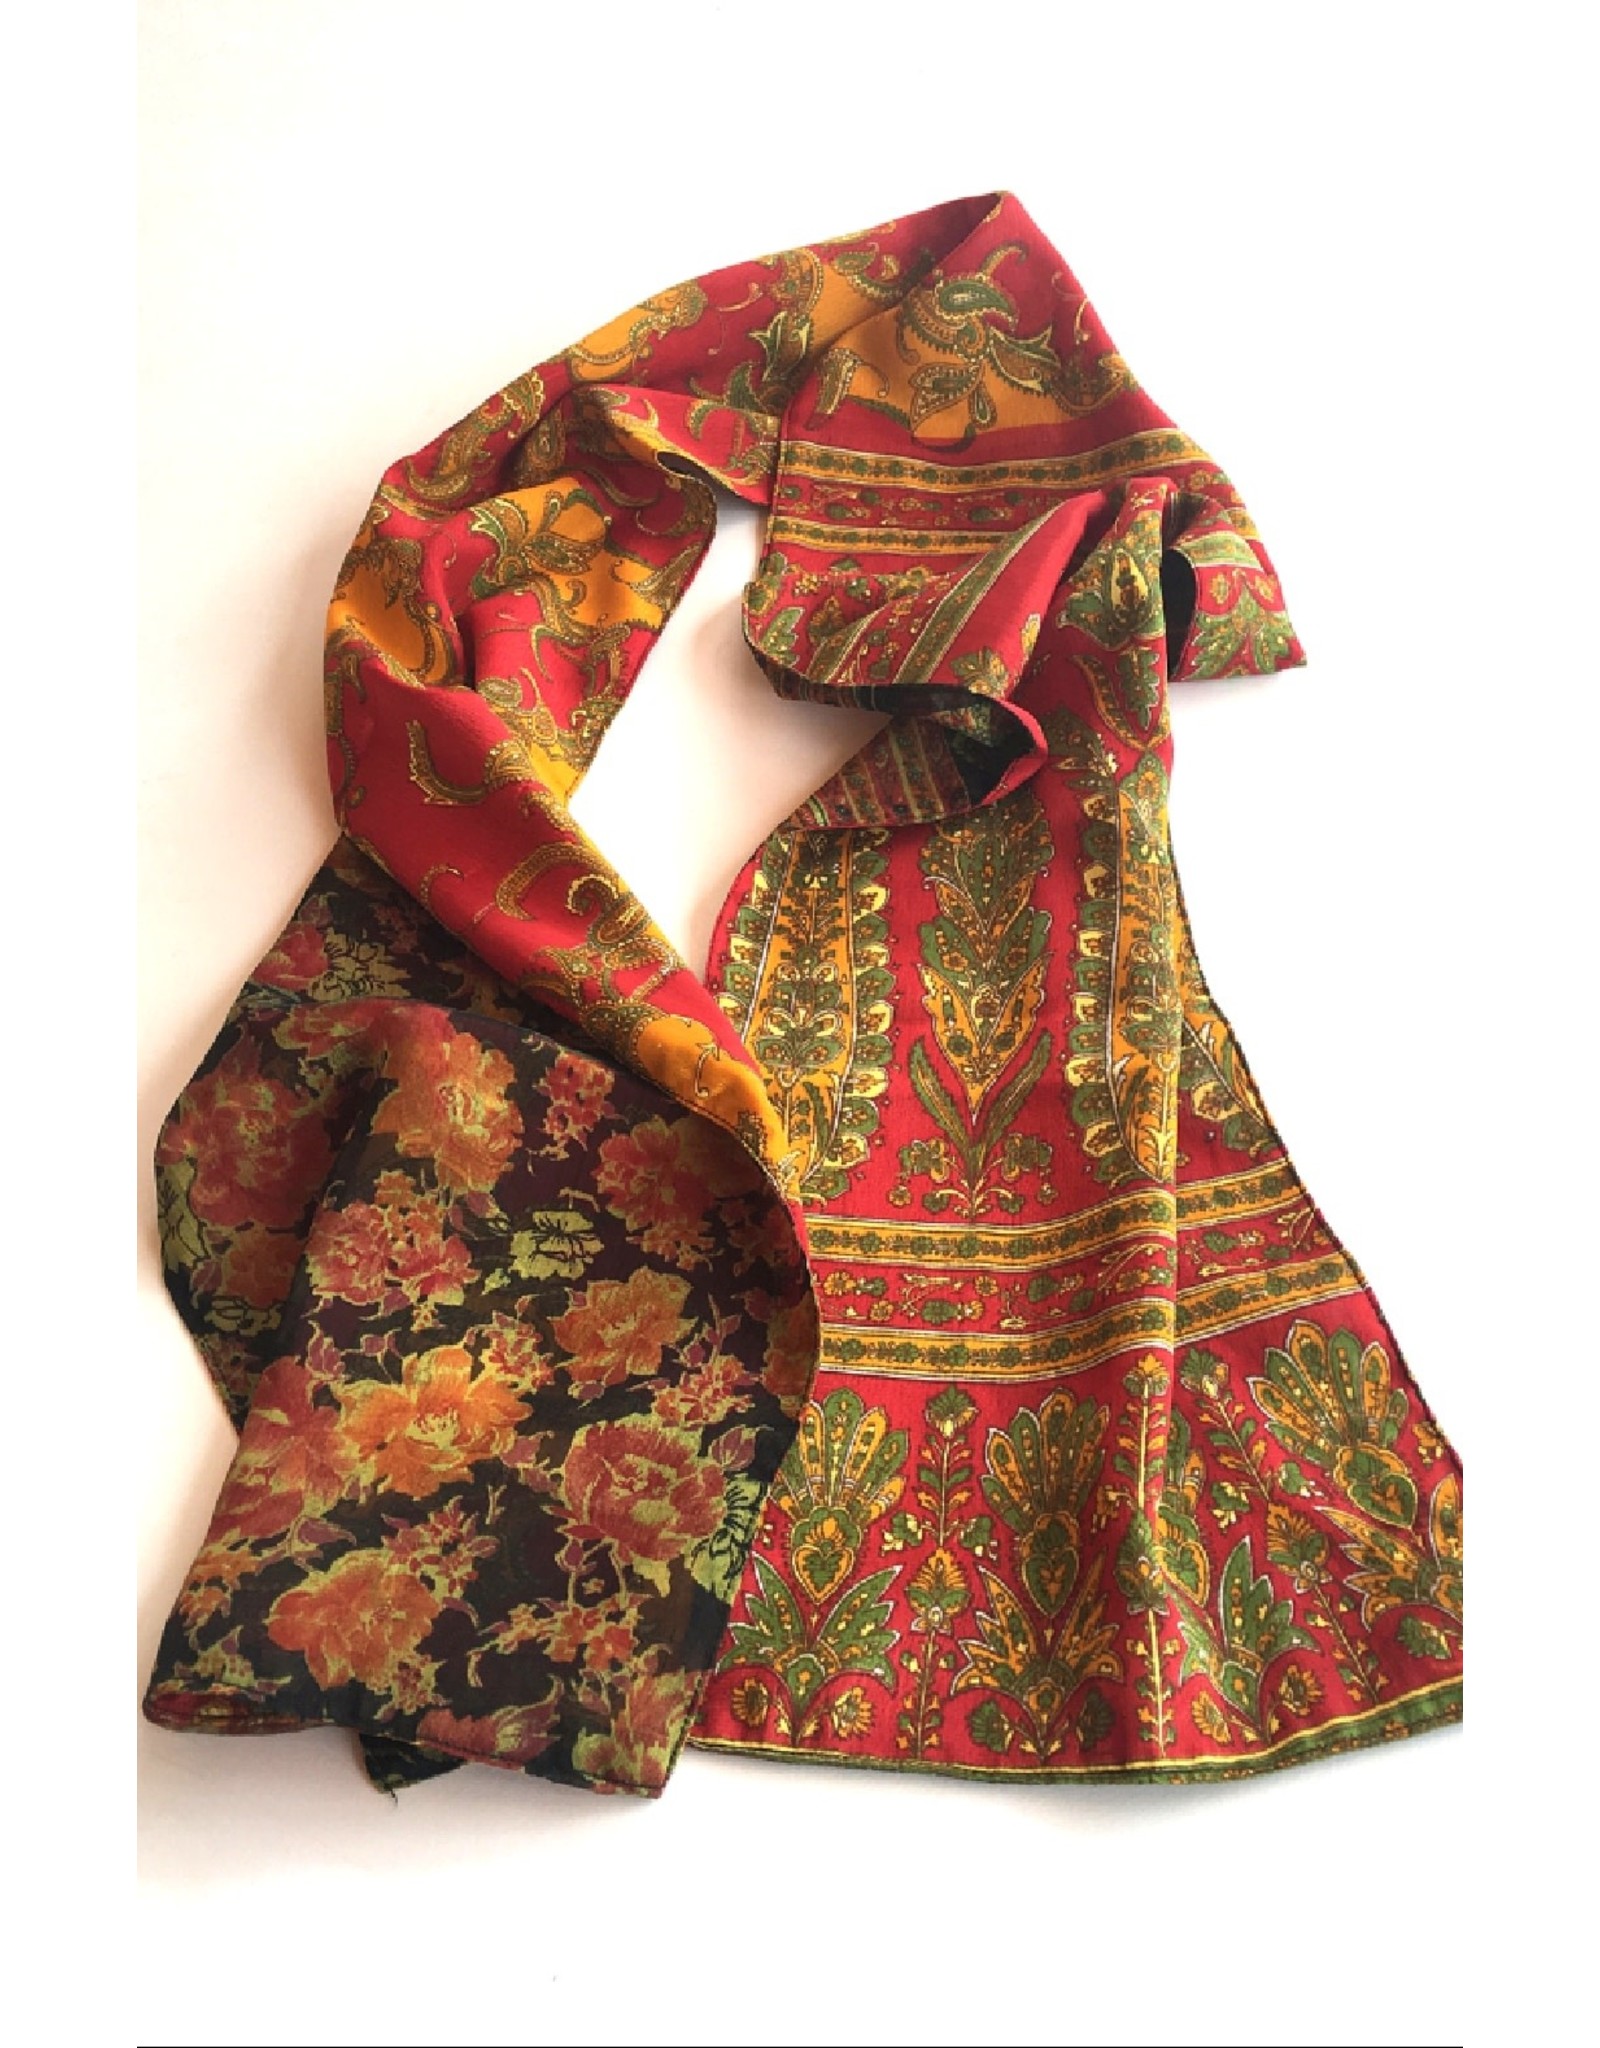 Trade roots Reversible Double Sided Silk Sari Scarf, Nepal (ALL COLORS VARY)